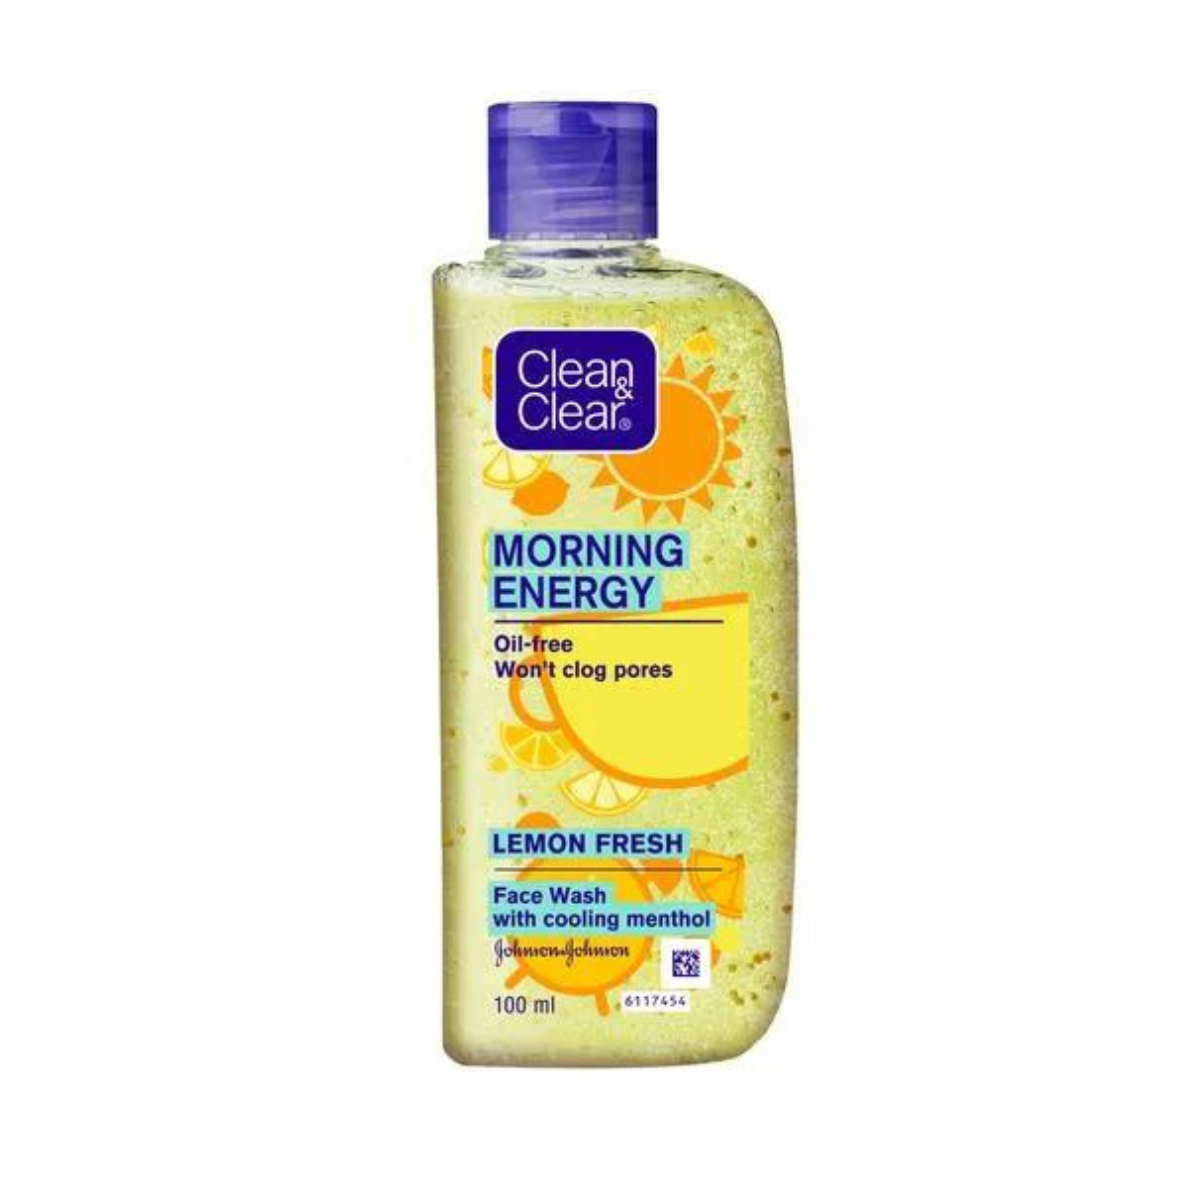 Clean & Clear Morning Energy - Oil Free Won't Clog Pores - Lemon Fresh - Face Wash With Cooling Menthol - 100ml